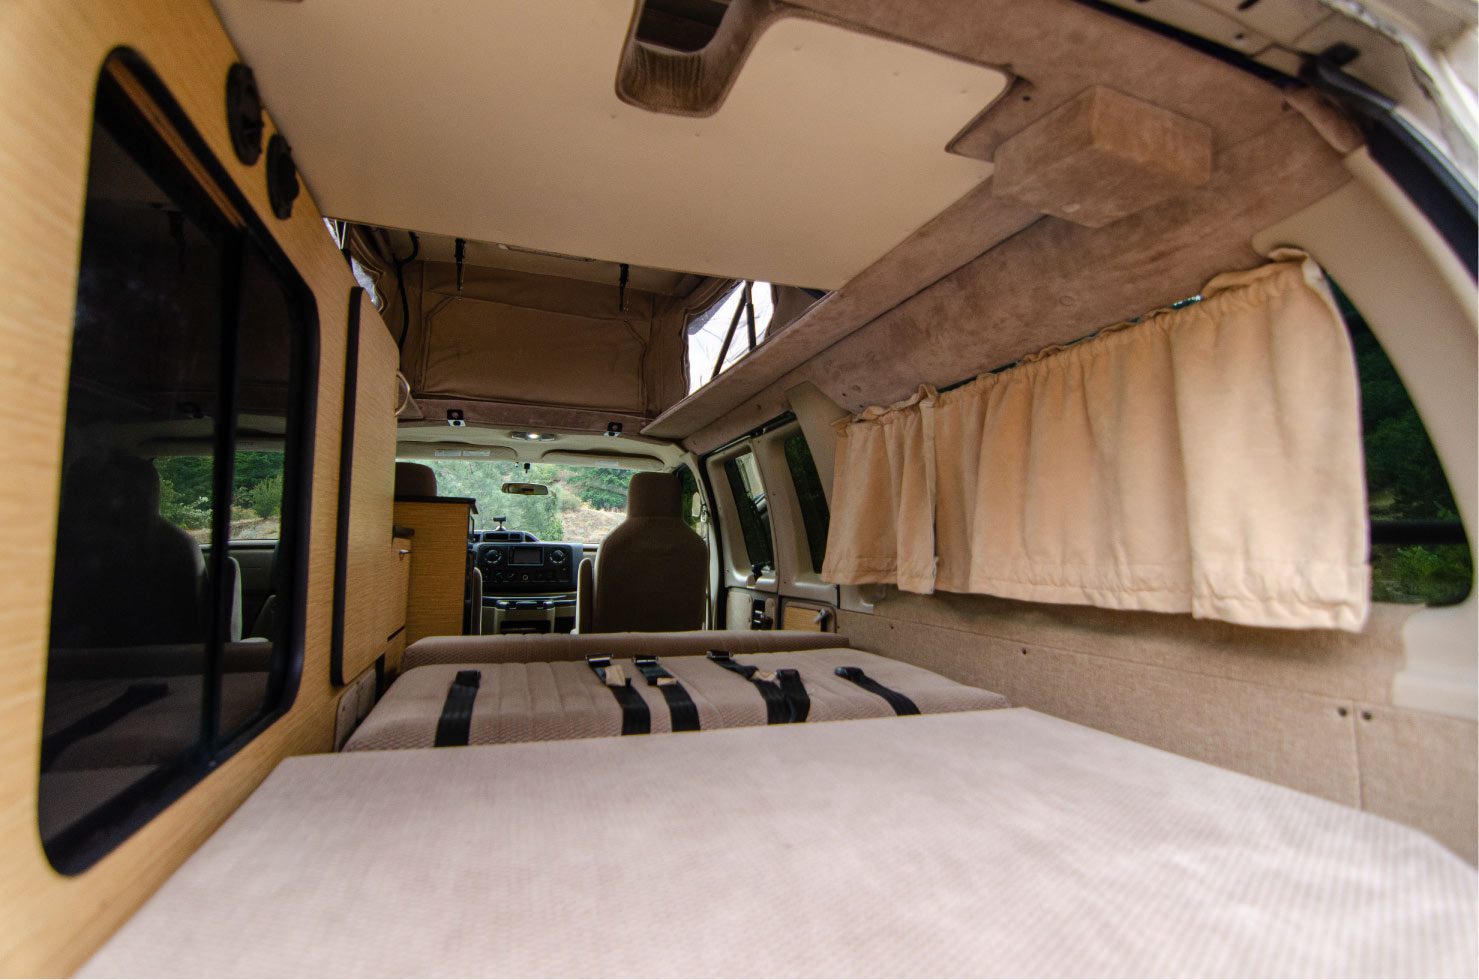 Inside view of the lower bed and sofa bed in a Ford E-Series 4x4 Econoline Sportsmobile RB50 Layout Campervan conversion for sale built by Van Specialties